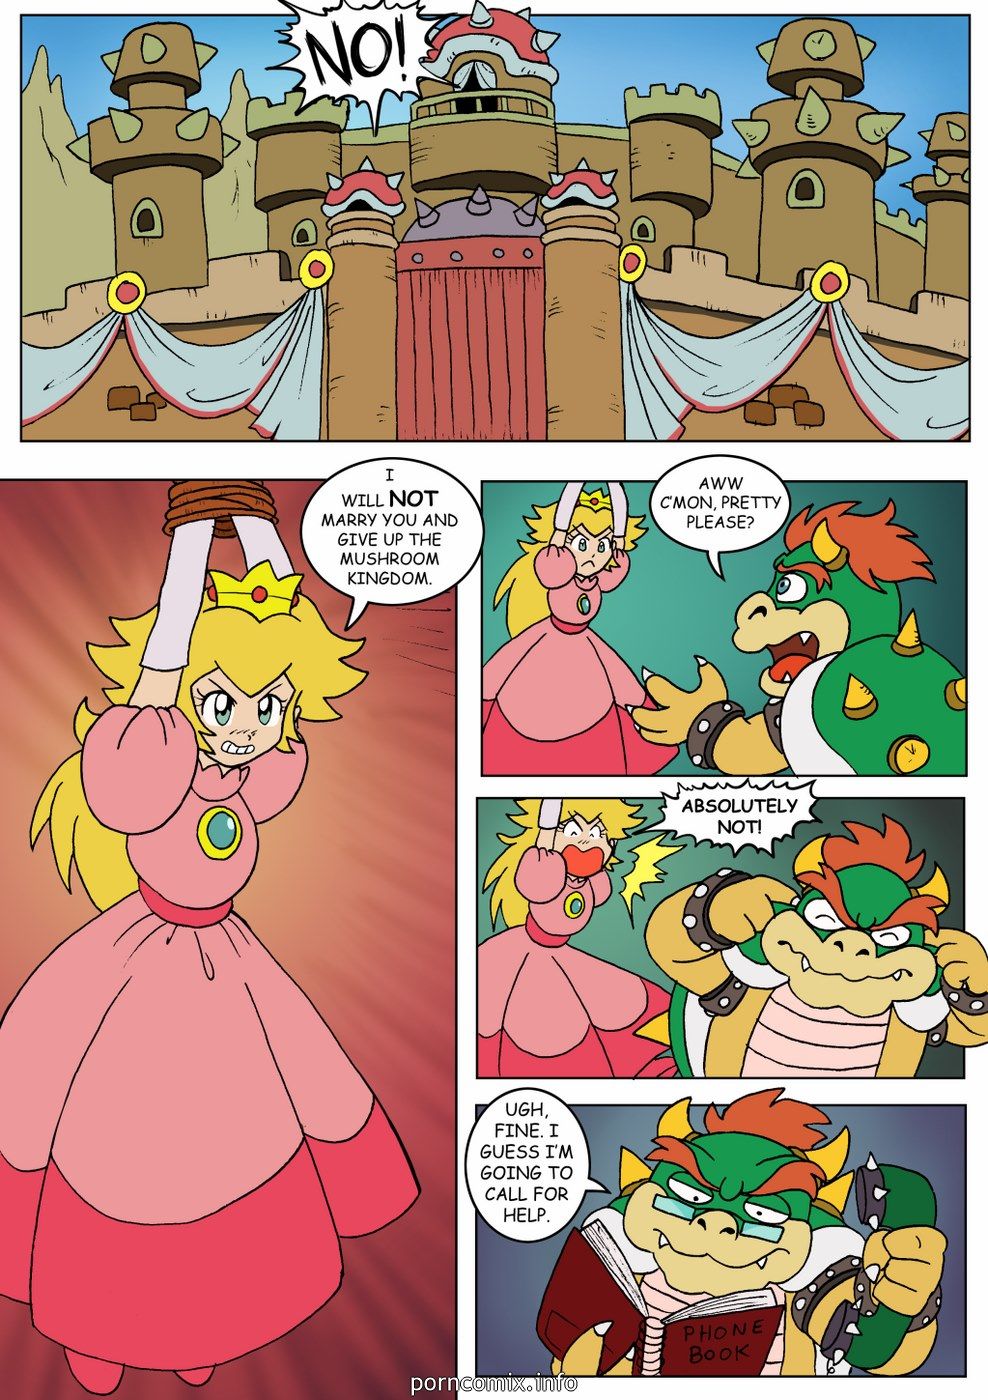 Peach's Tail of Escape (Super Mario Brothers) page 2